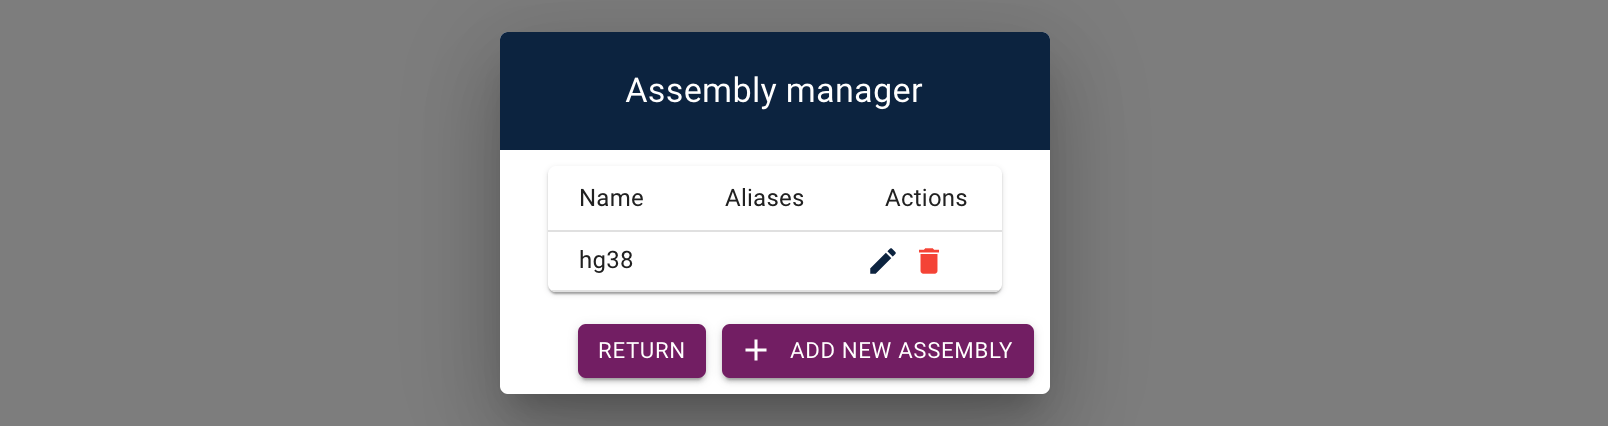 Assembly manager page for adding a new assembly.